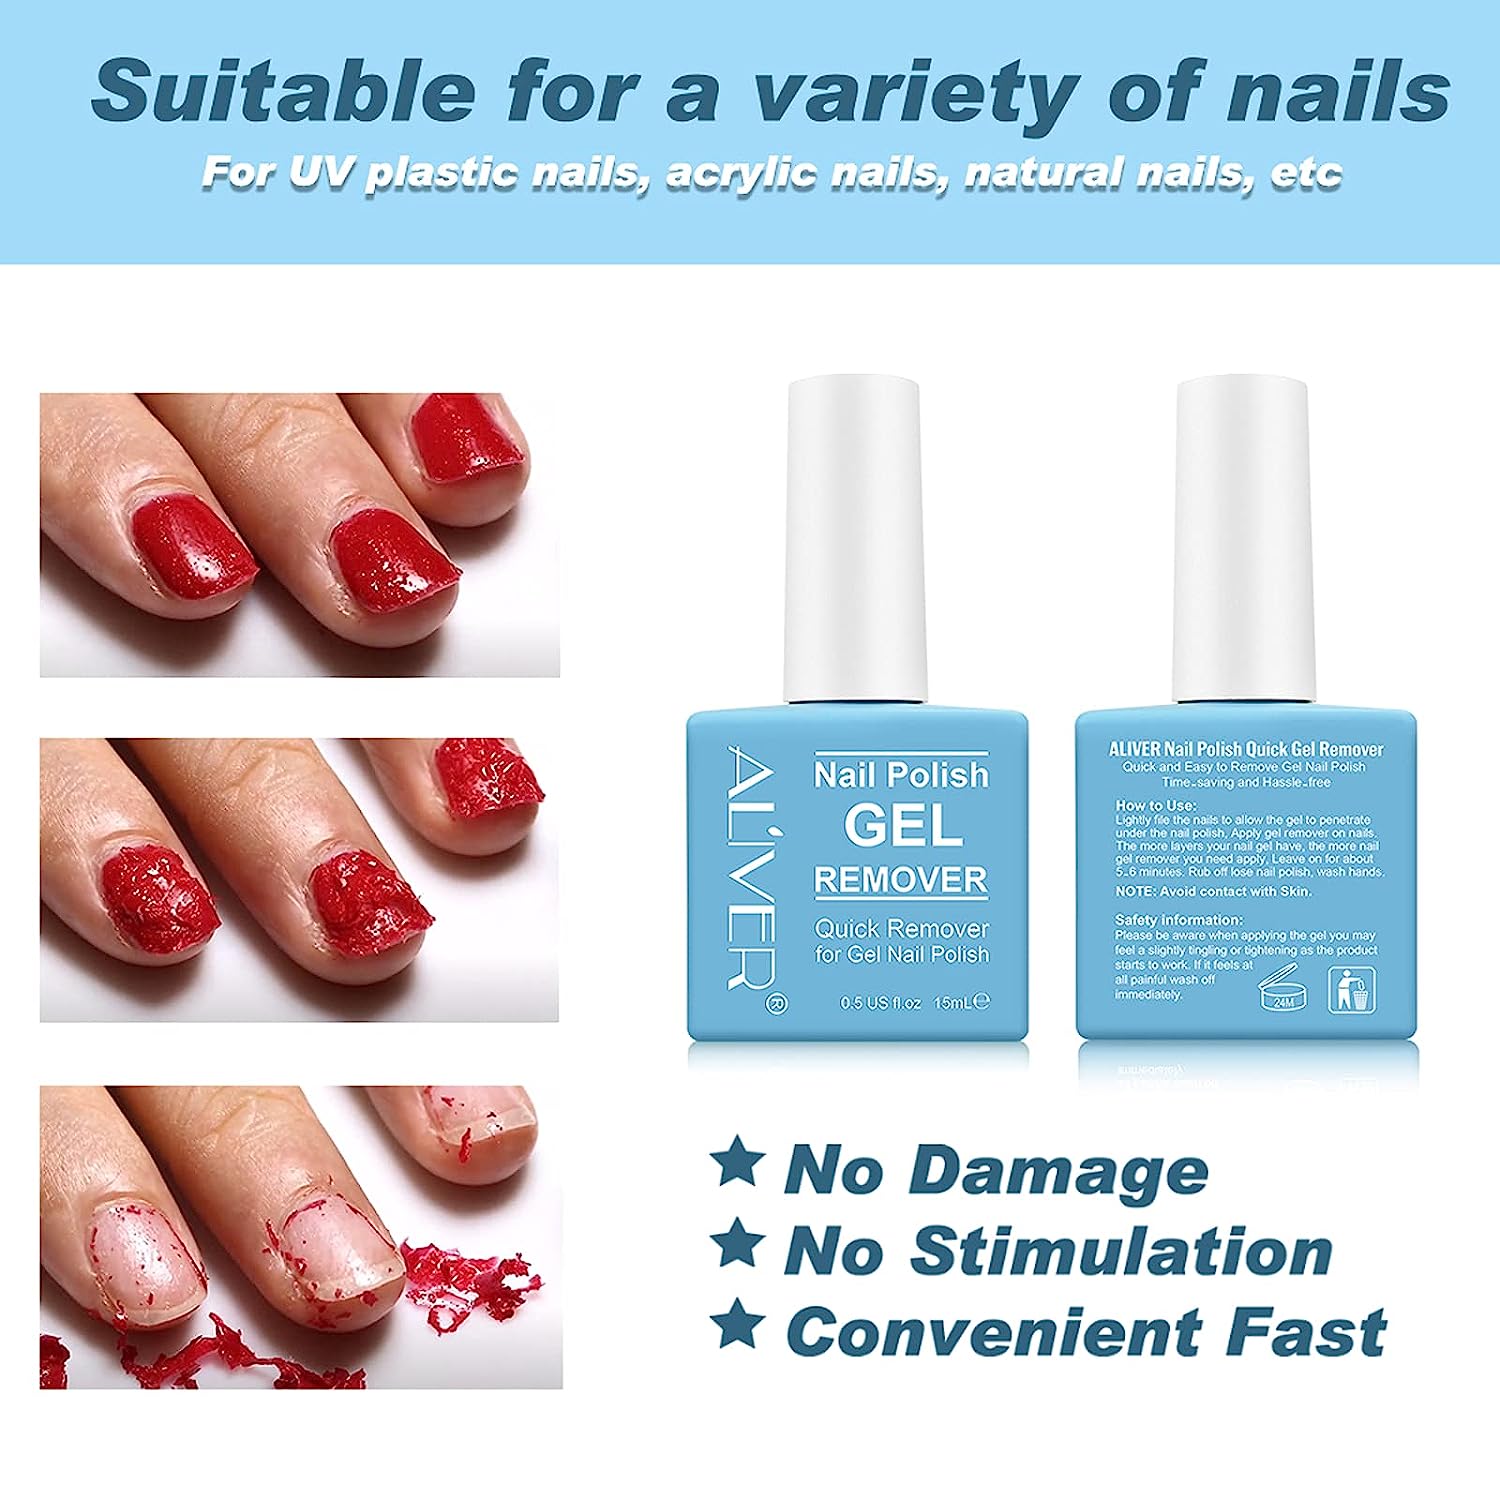 Gel Nail Polish Remover 1Pcs, Professional Gel Polish Remover for Nails, No Need for Foil, Quick &amp; Easy Polish Remover in 2-3 Minutes, No Need Soaking or Wrapping-15Ml